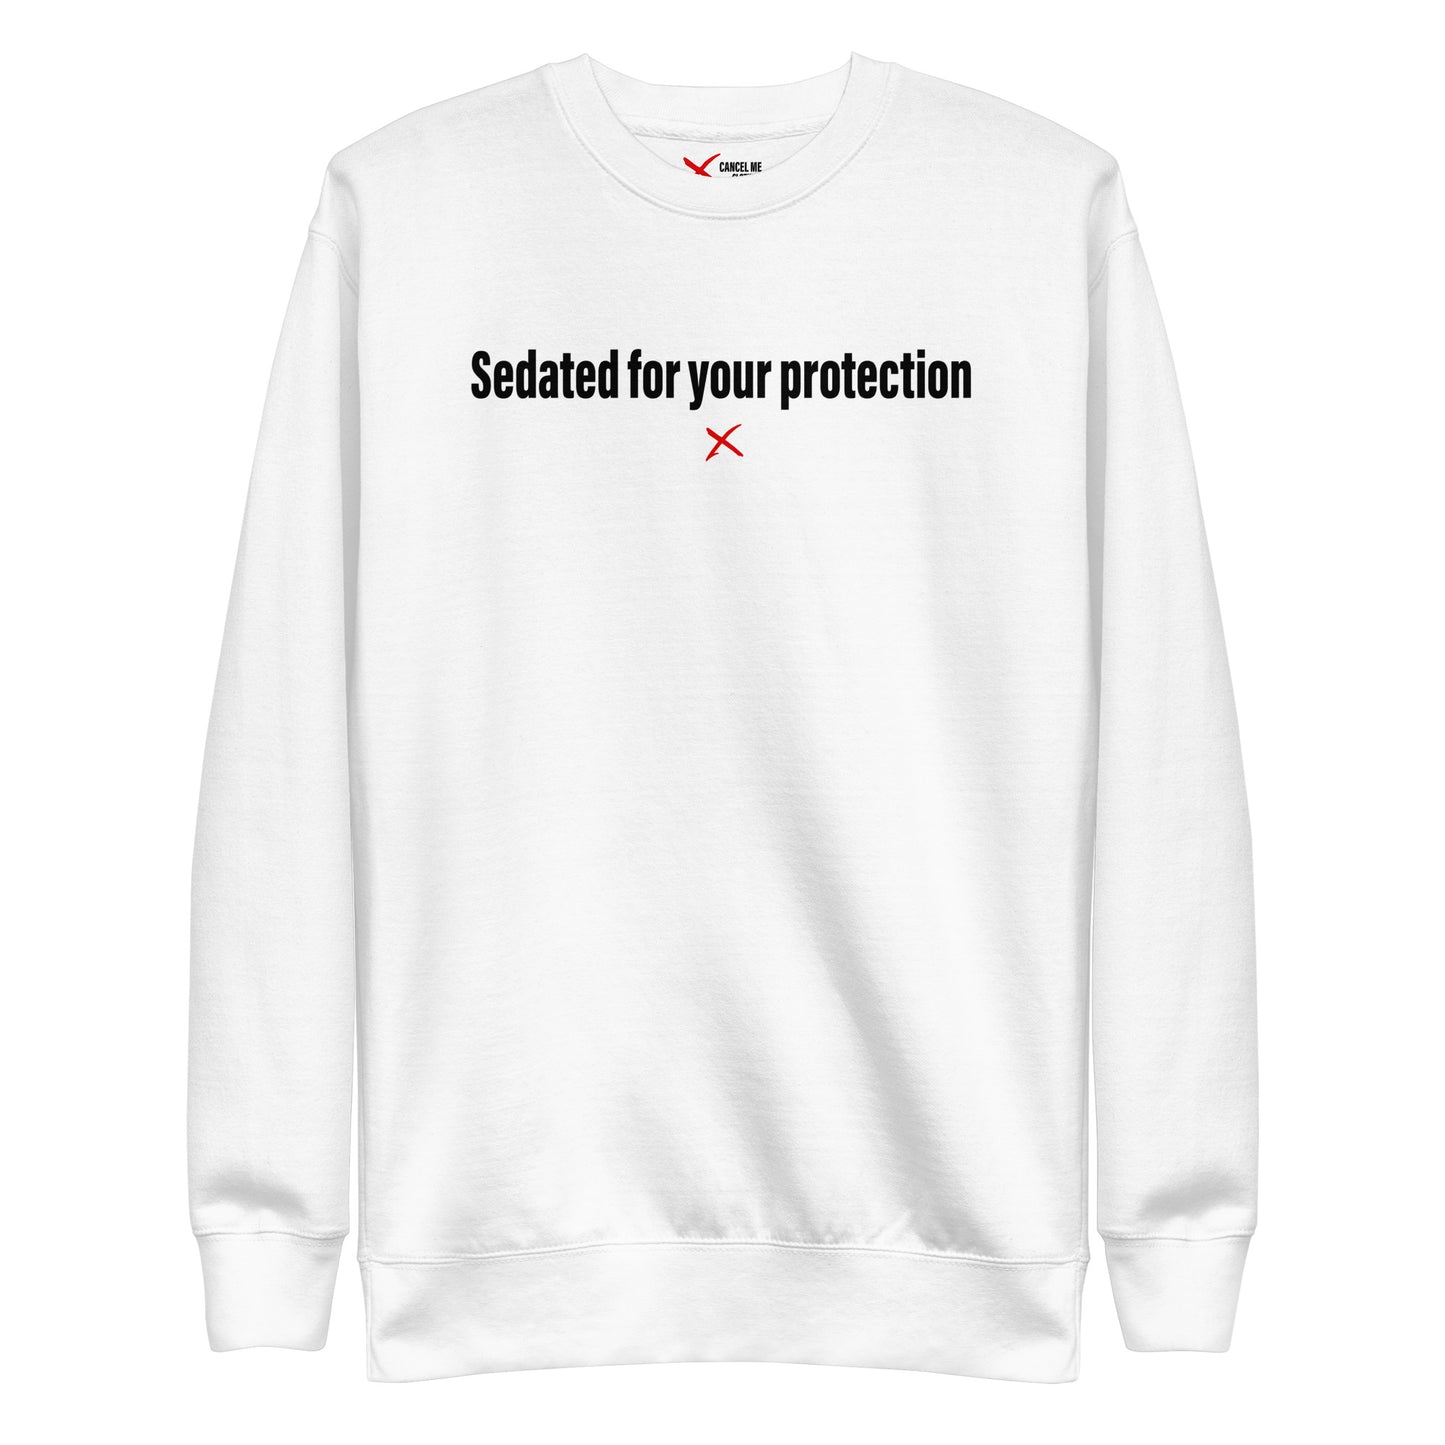 Sedated for your protection - Sweatshirt